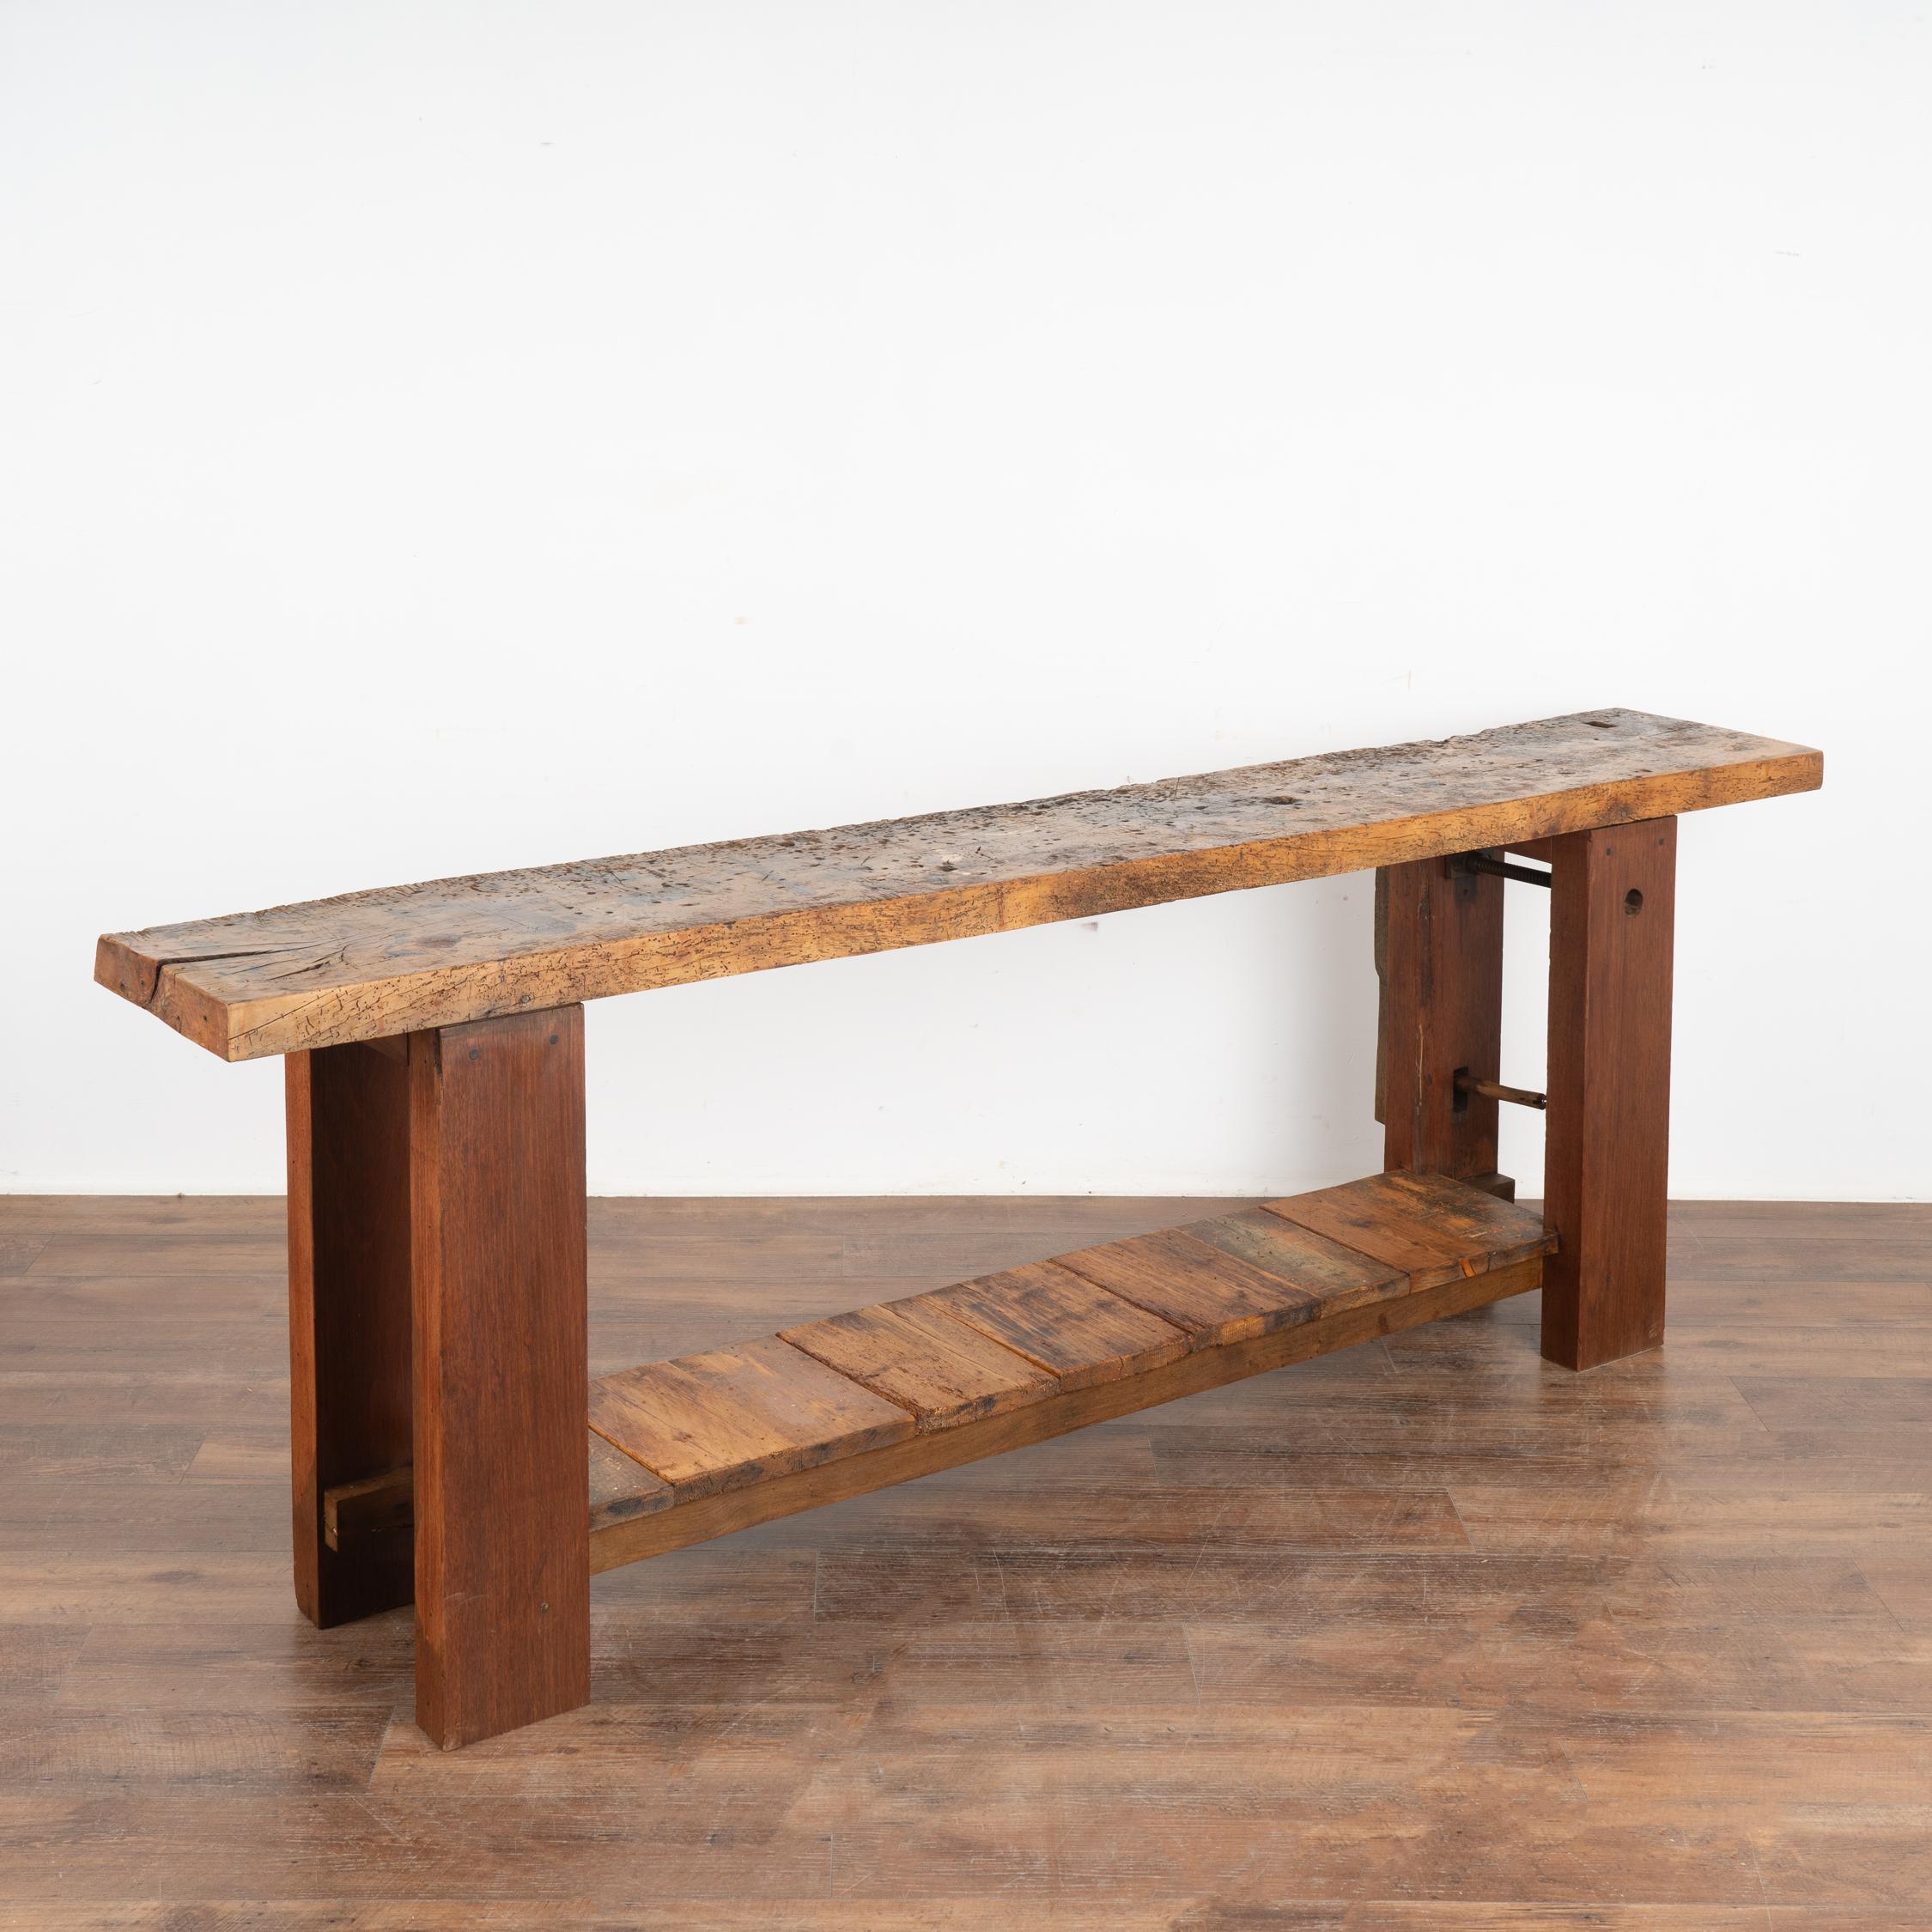  Rustic Console Table With Shelf, Carpenter's Workbench from France circa 1880 6